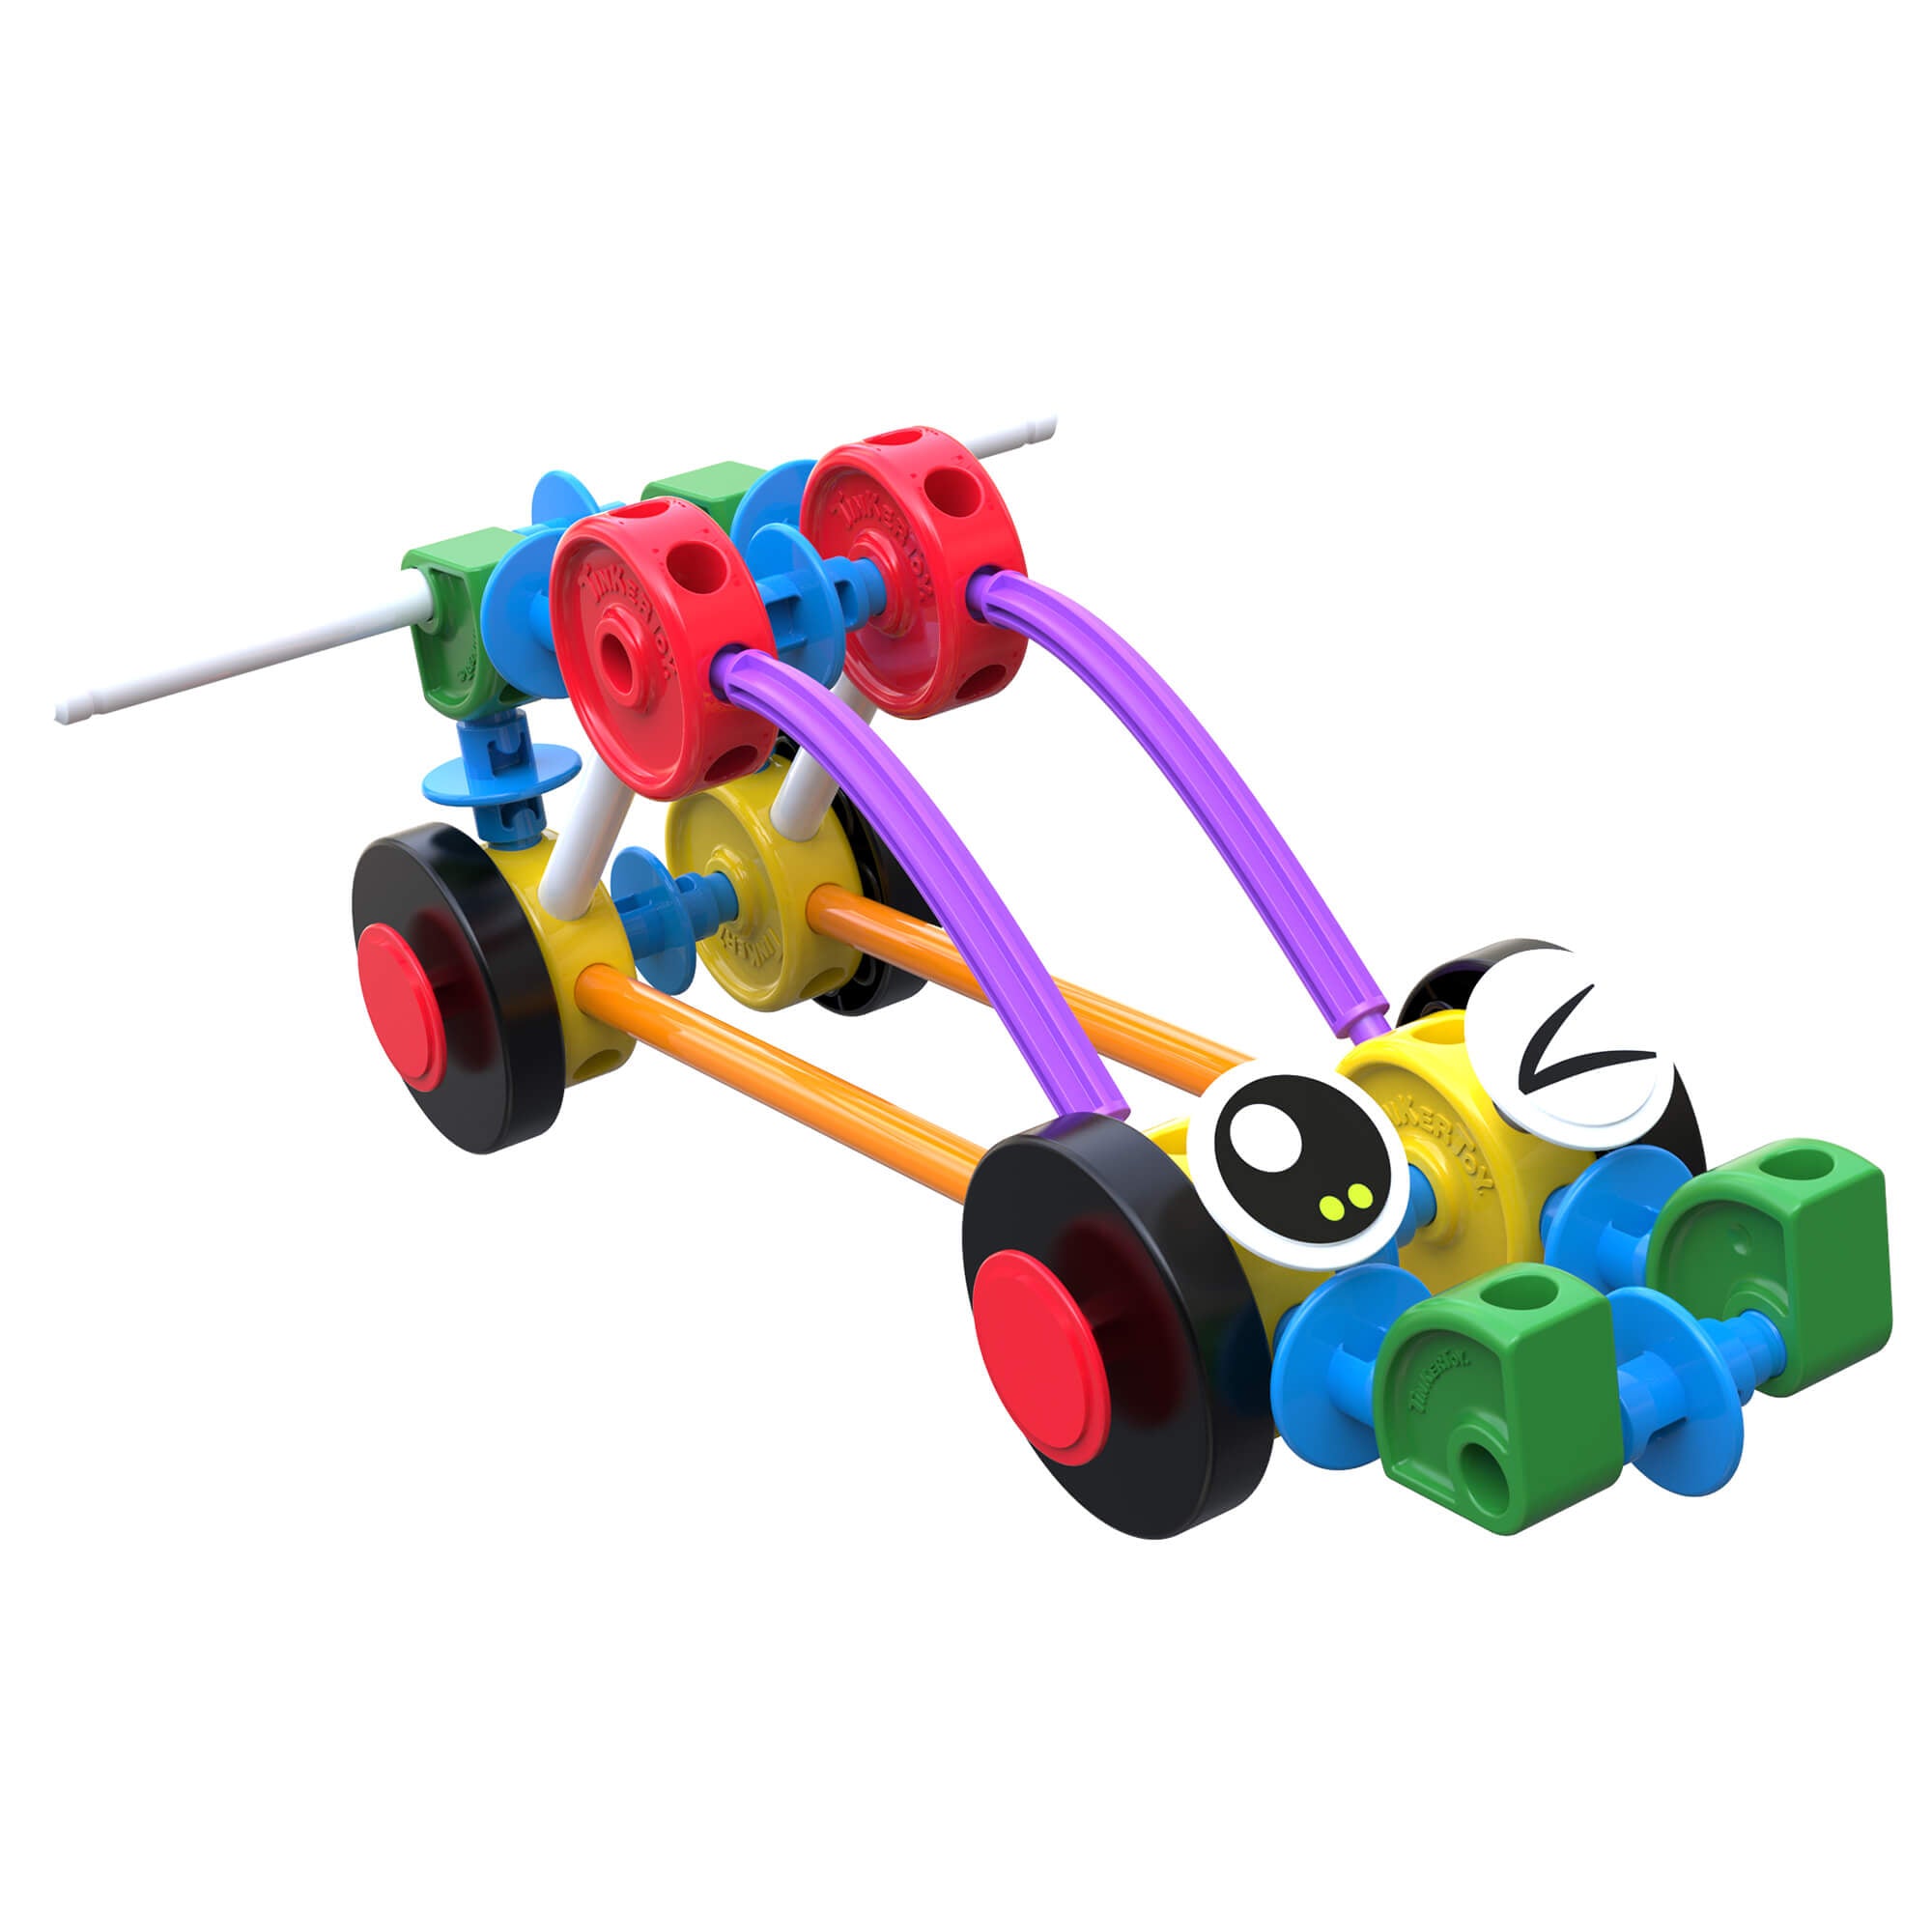 Tinkertoy On the Go Building Set